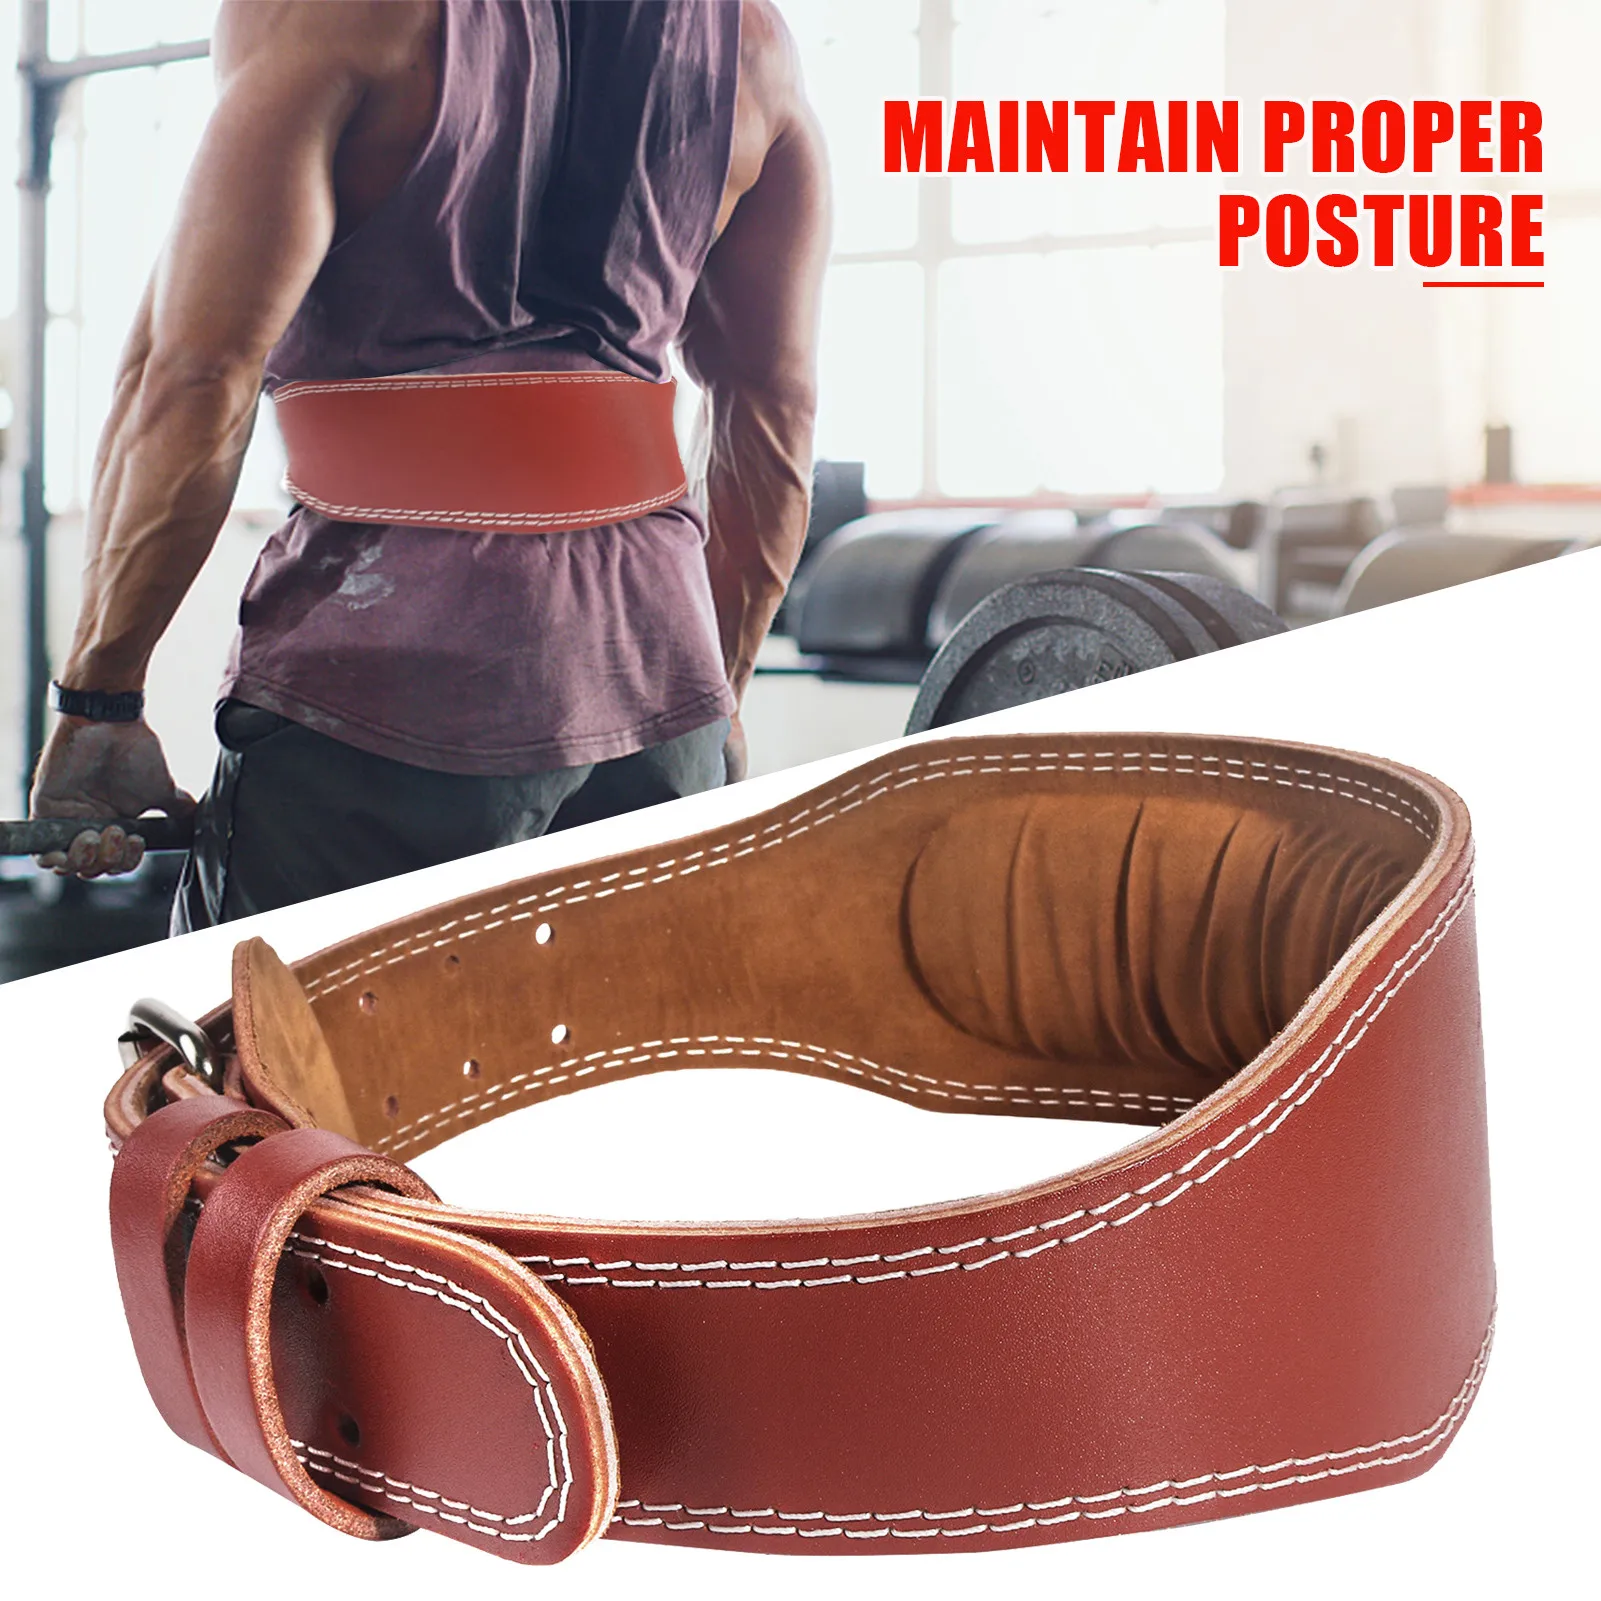 

Lever Buckle Fitness Belt Waist Protection Squat Deadlift Weightlifting Sports Training Strength Lifting Leather Belt